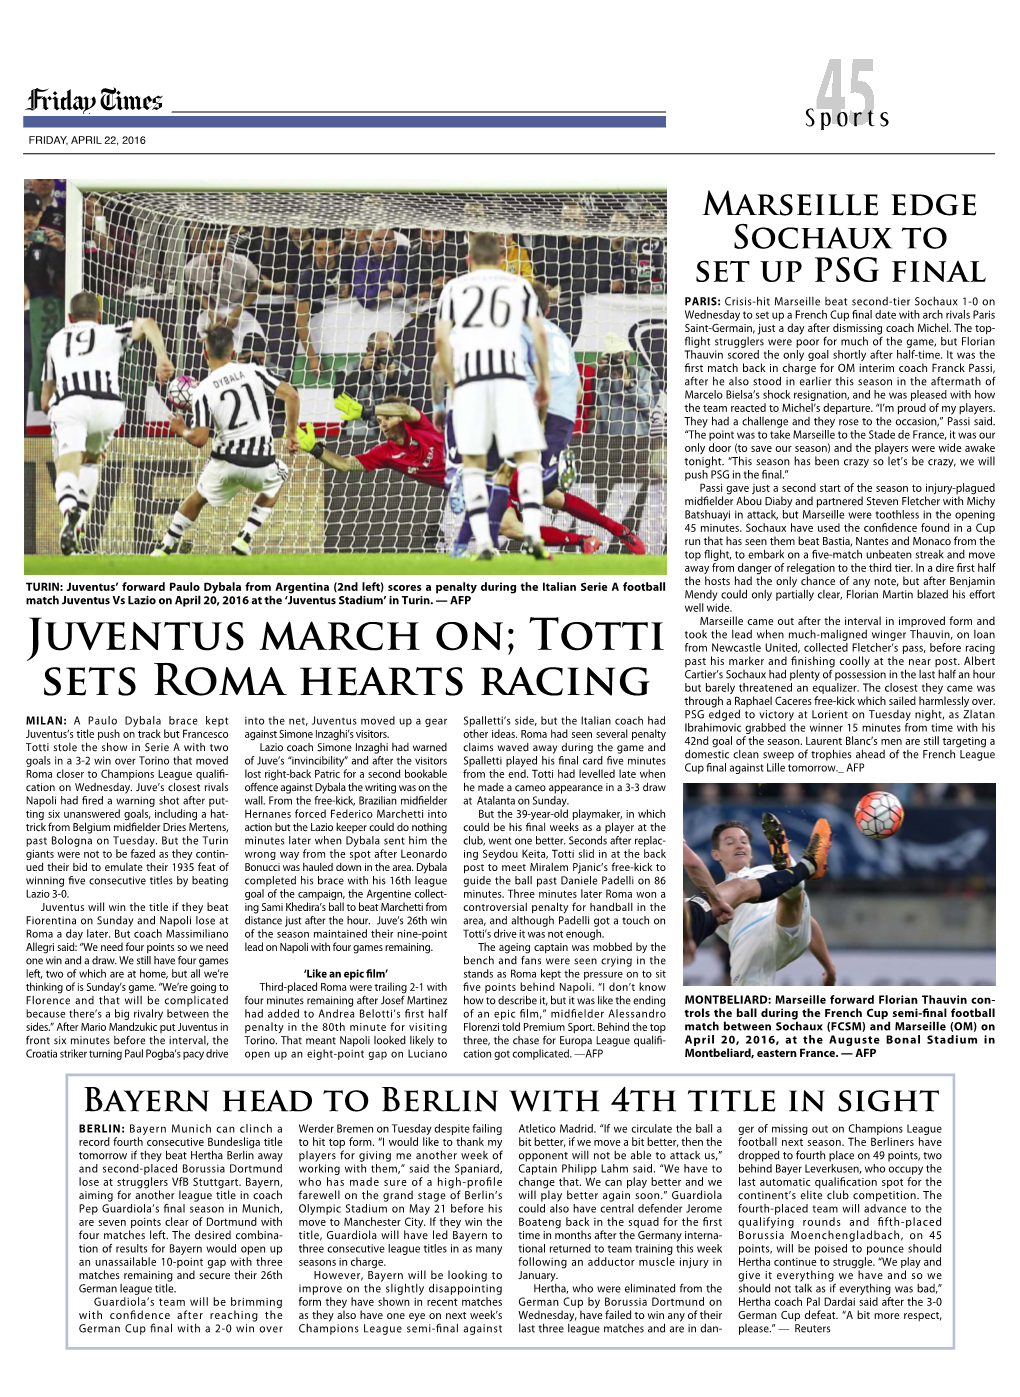 Juventus March On; Totti Sets Roma Hearts Racing